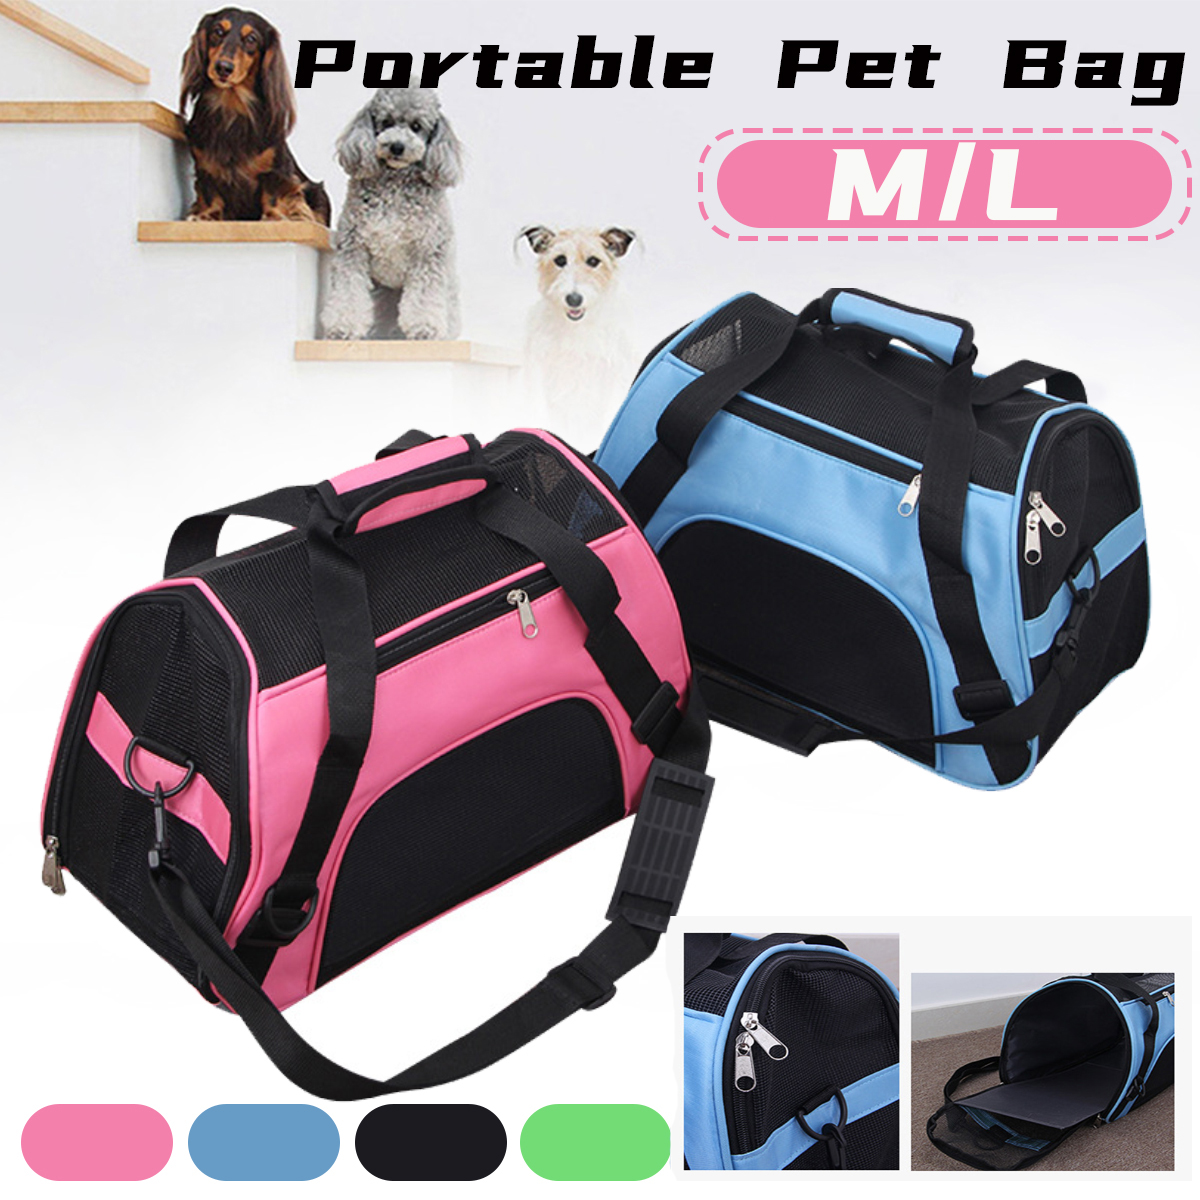 Portable-Dog-Cat-Carrier-Bag-Soft-sided-Pet-Puppy-Travel-Bags-Breathable-Mesh-Small-Pet-Chihuahua-Ca-1789561-1